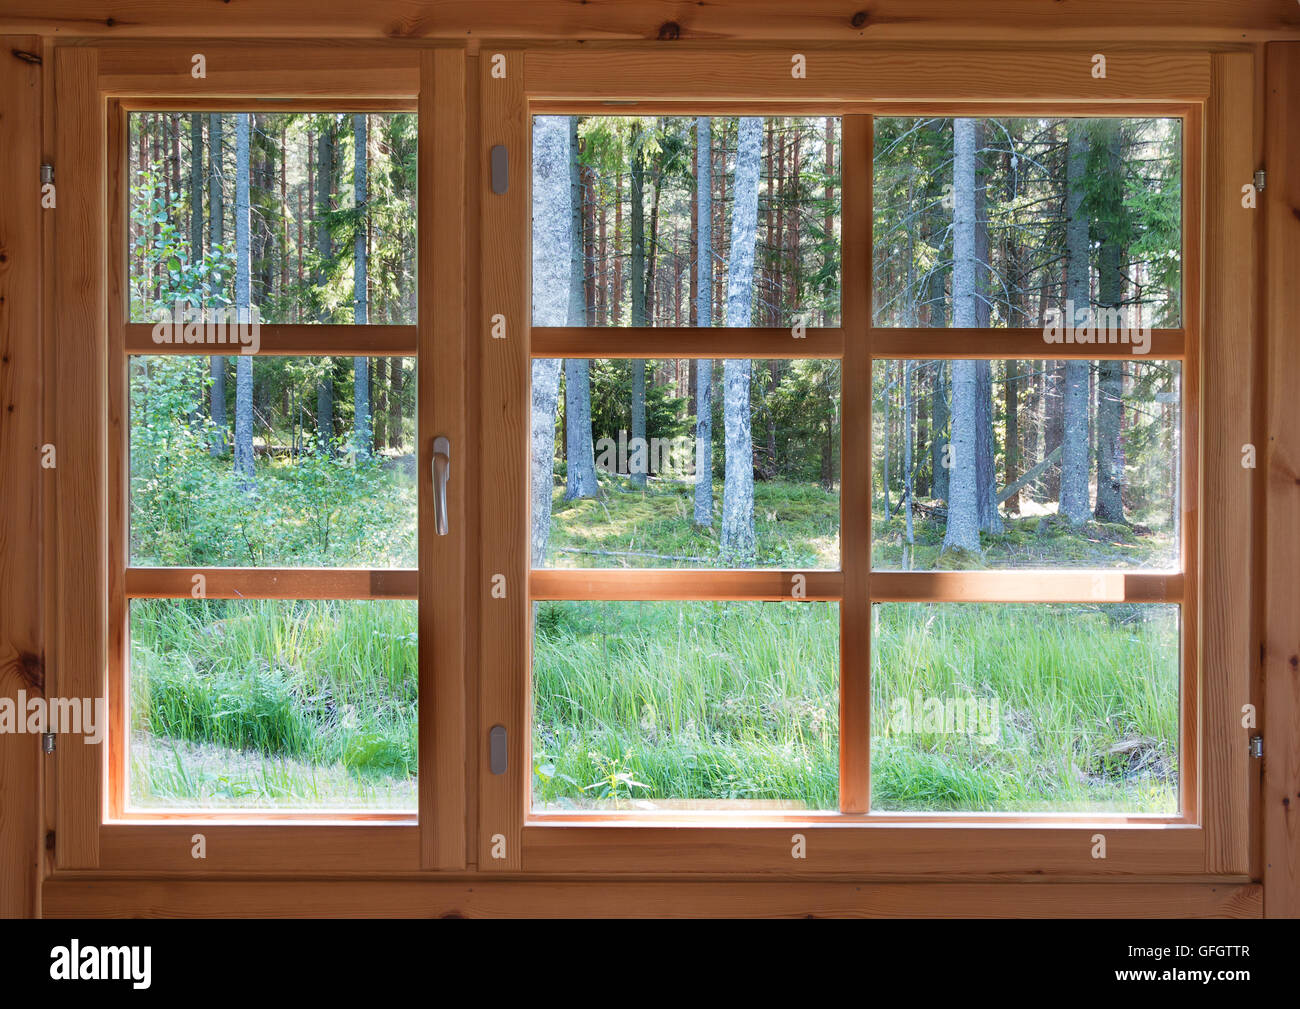 Green sunny view of summer woods in the wooden country window. Stock Photo